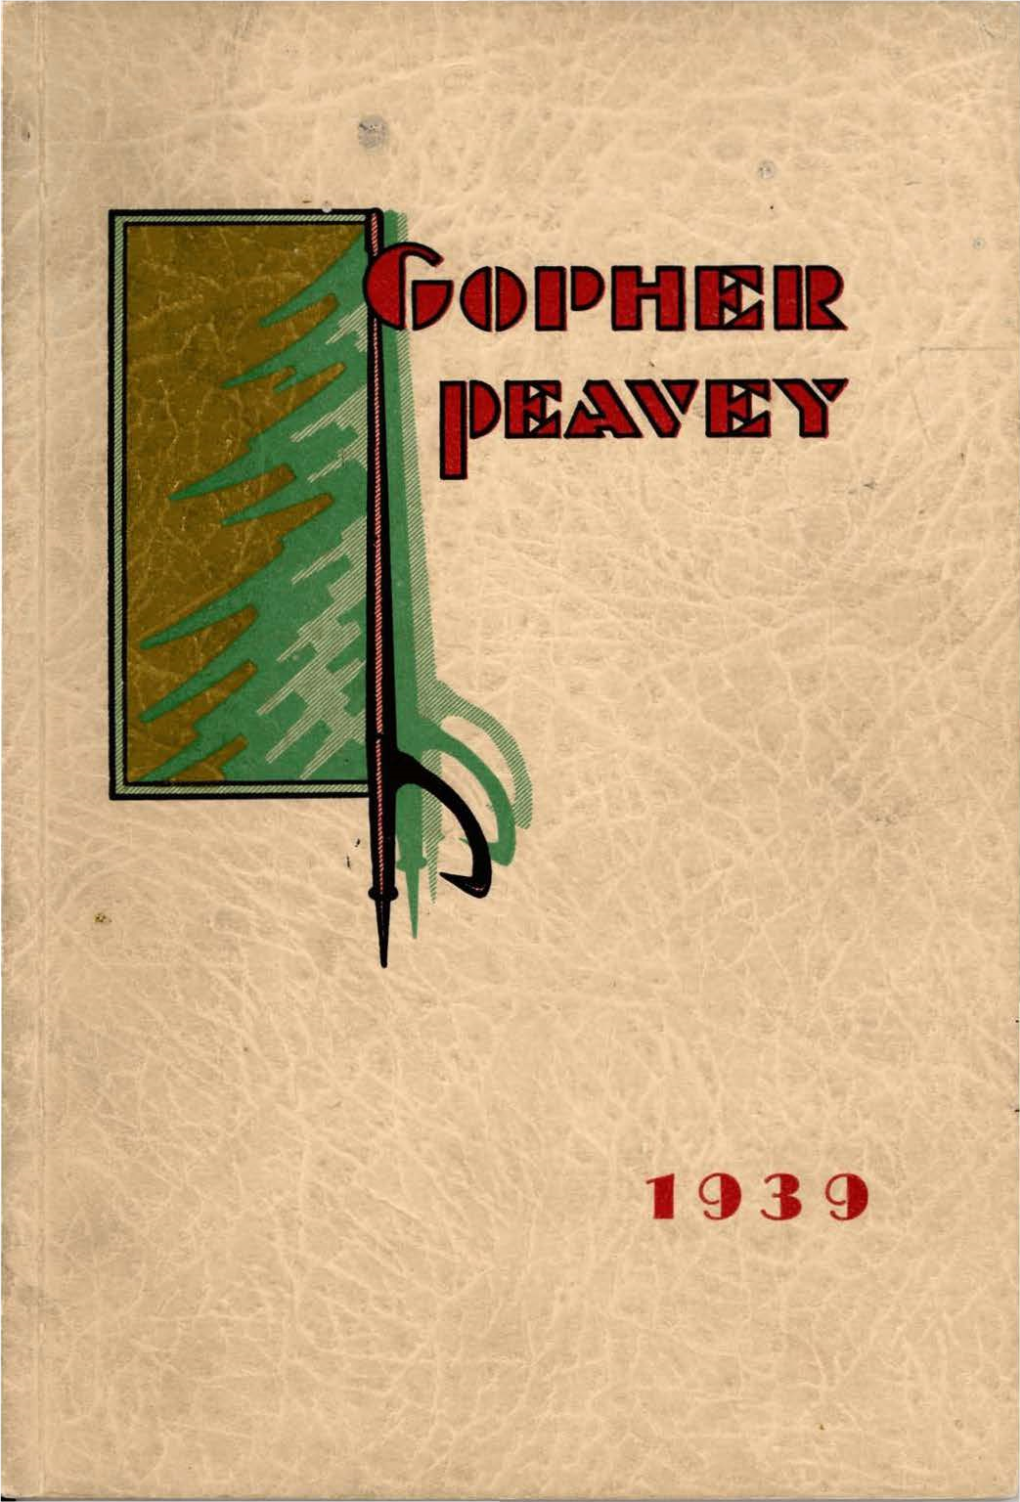 The Gopher Peavey 1939